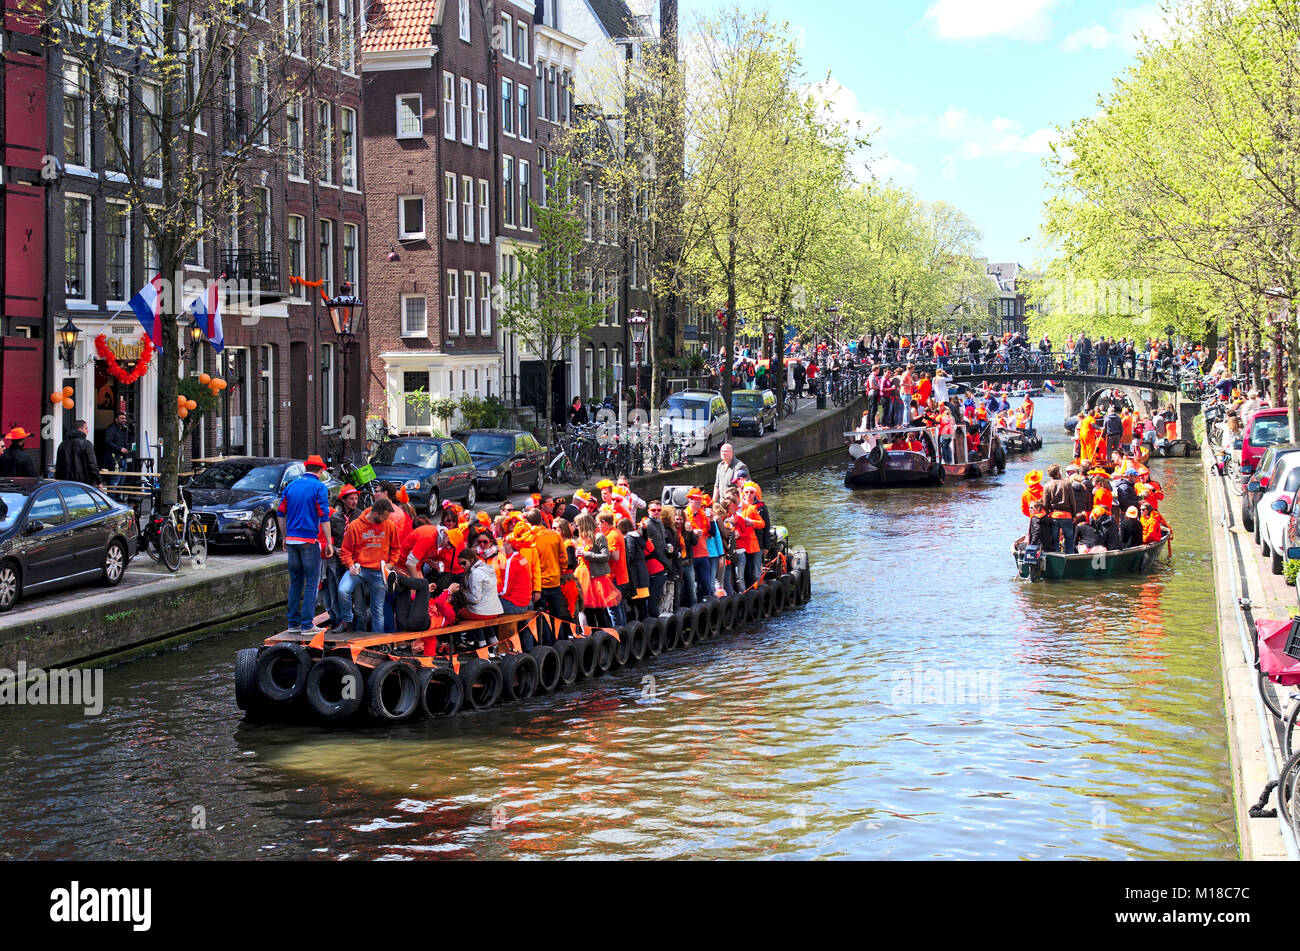 A scene on a canal in Amsterdam on a King's day. Several boats in the canal all full of celebrating people wearing orange colour clothes. Stock Photo